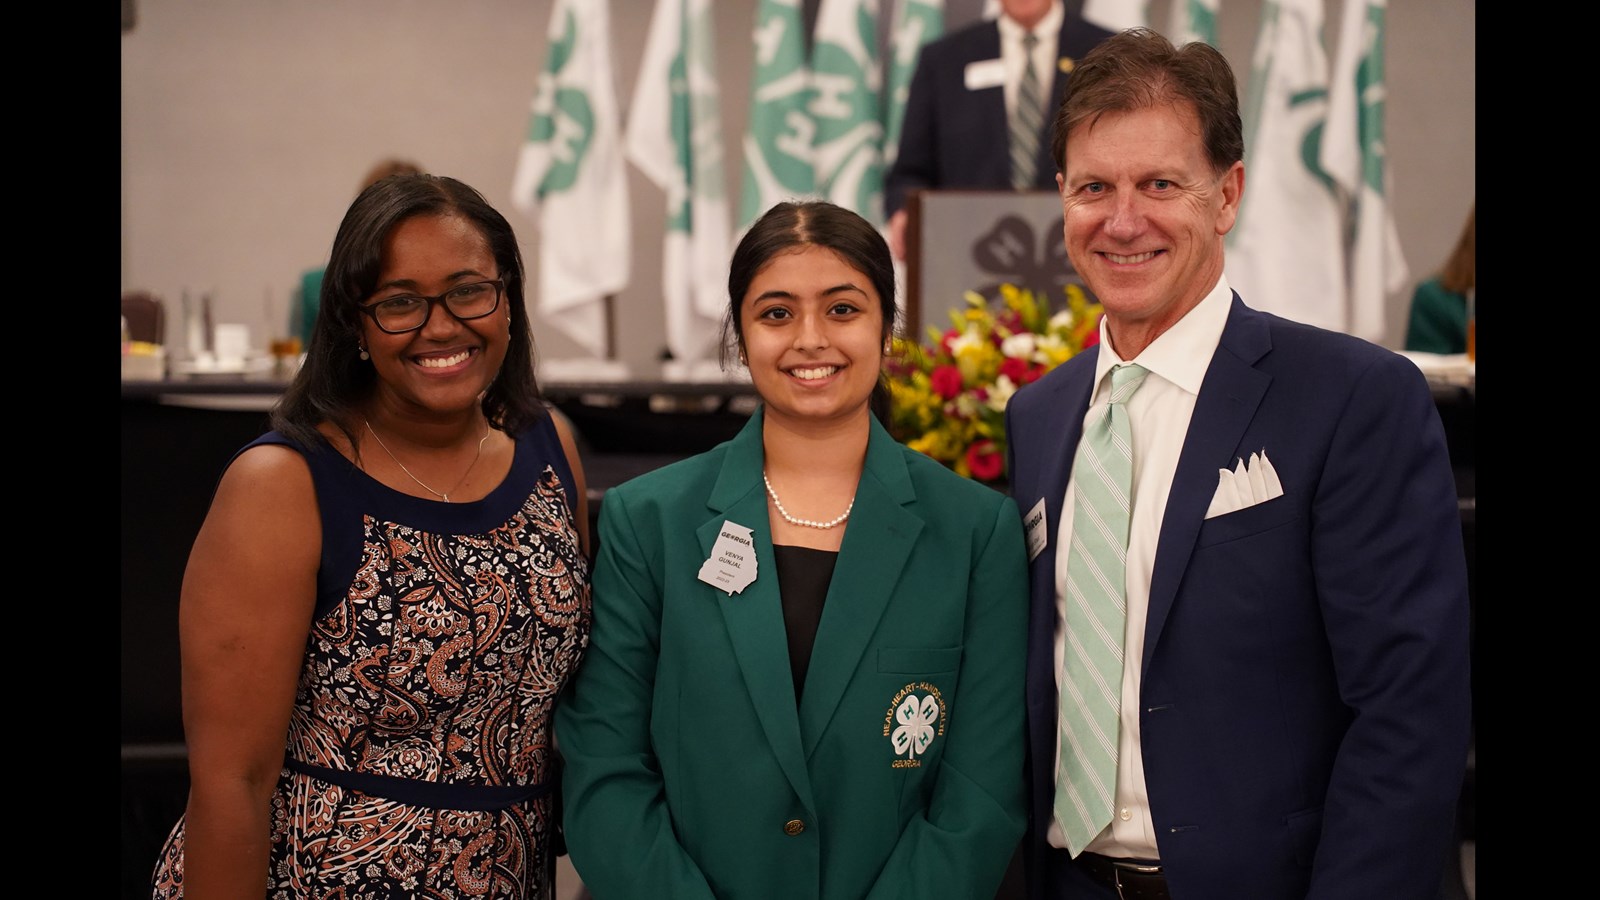 Wheeler High School Student Venya Gunjal Ms. Brittani Lee, Cobb County Extension Agent, and Mr. Scott Shell, Chairman of the Georgia 4-H Foundation Board of Trustees, after being inducted into the presidency at 2022 State 4-H Congress.